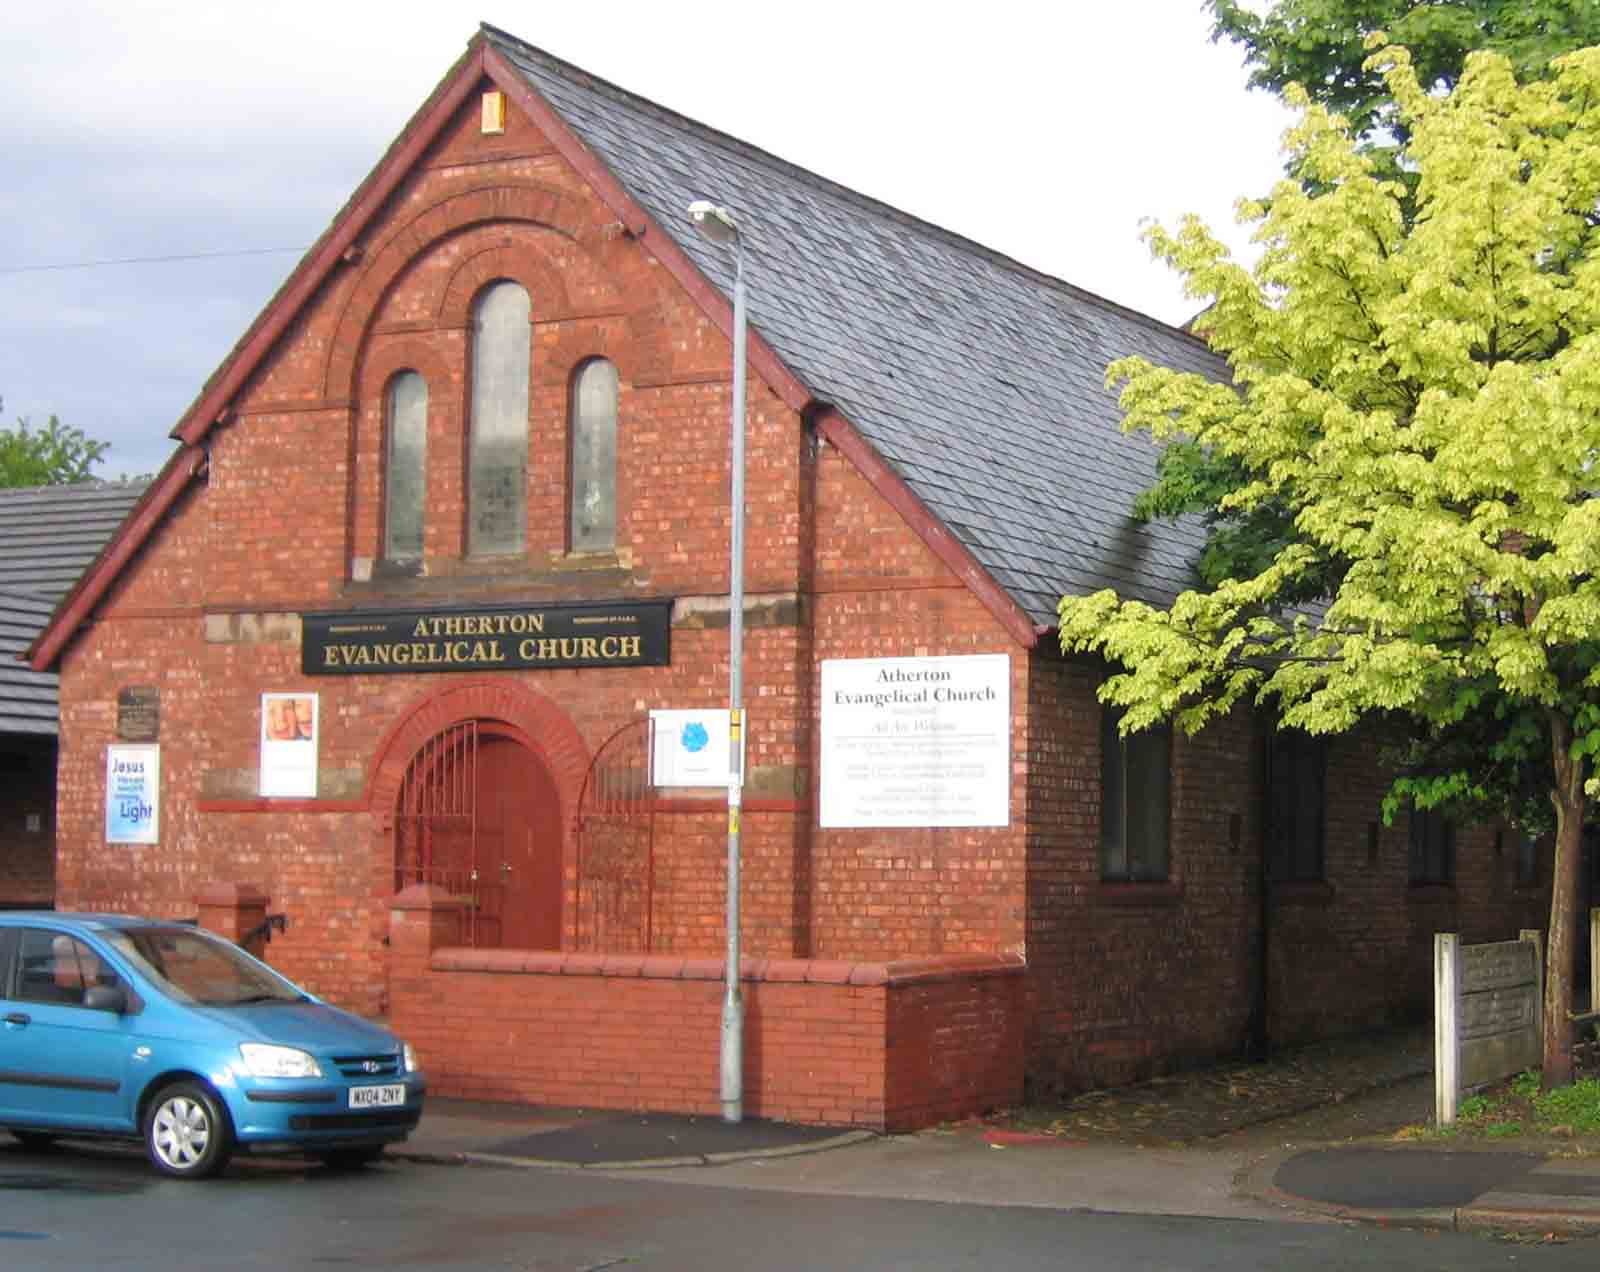 Originally a church hall belonging to Atherton Primitive Methodist Chapel on Alma Street, now in use by Atherton Evangelical Church. Photo by Peter Wood, July 2005